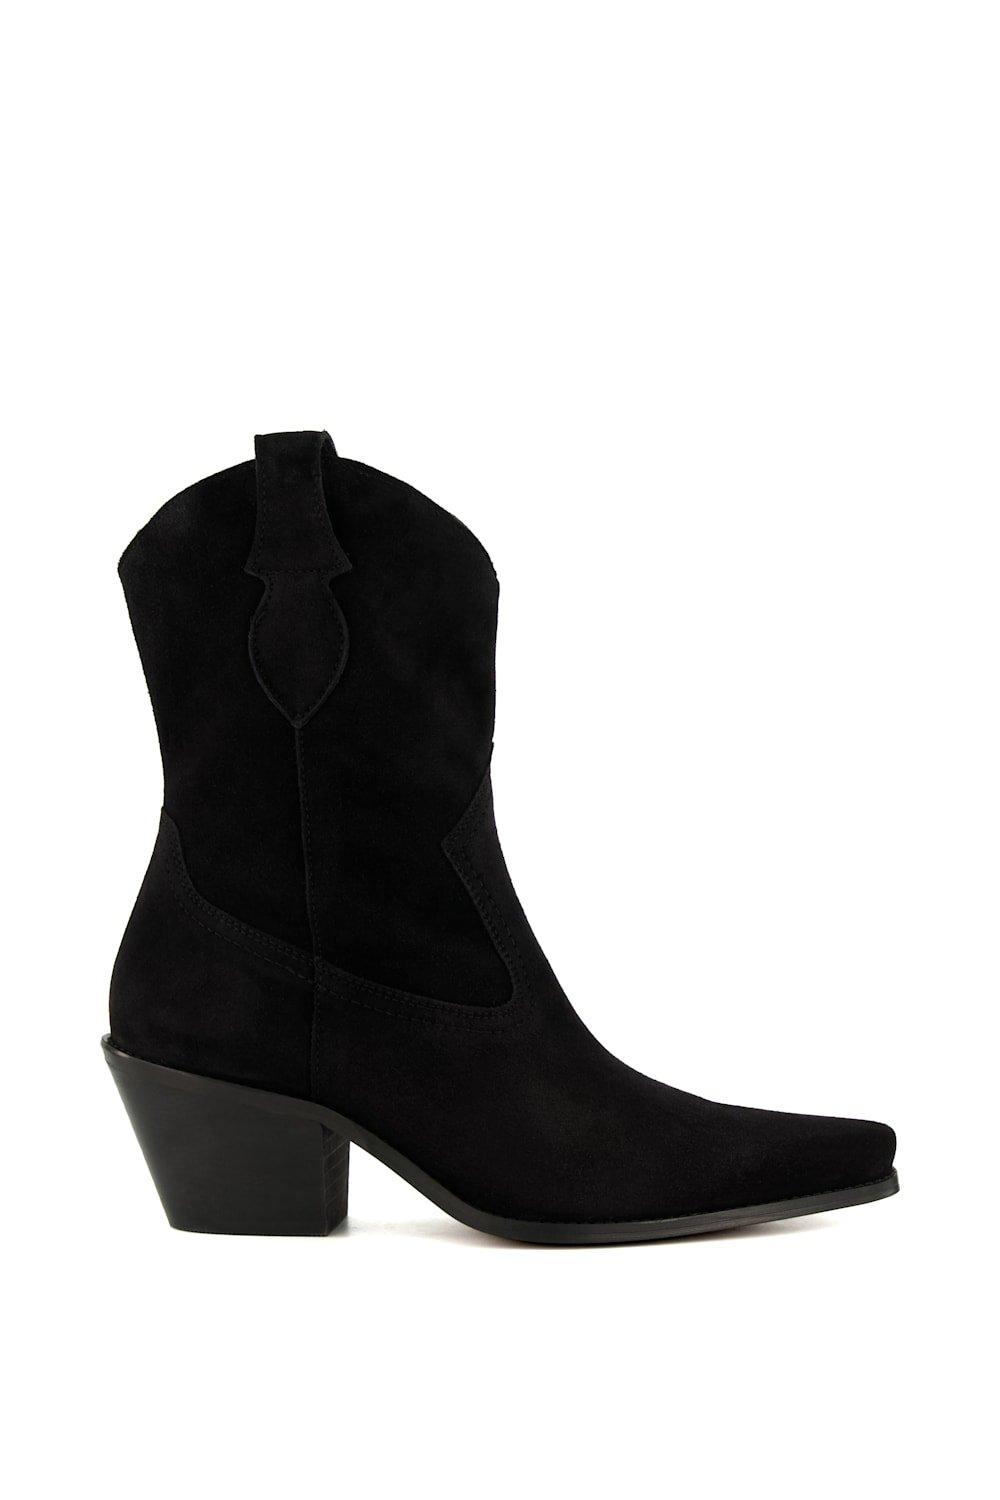 Boots | 'Pardner' Suede Western Boots | Dune London